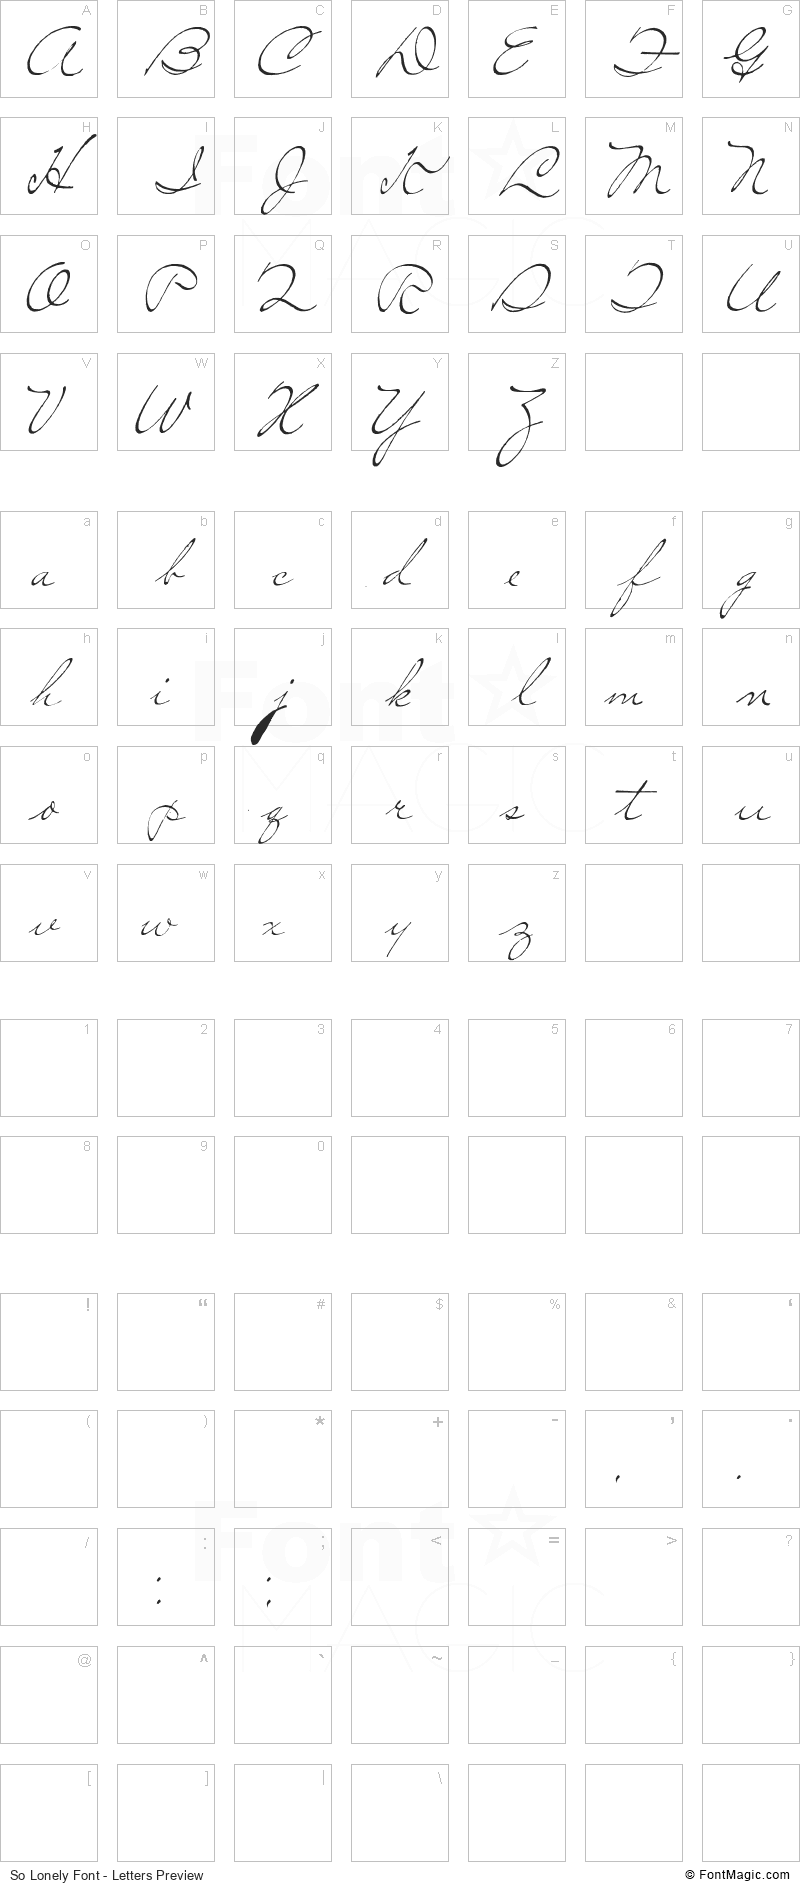 So Lonely Font - All Latters Preview Chart